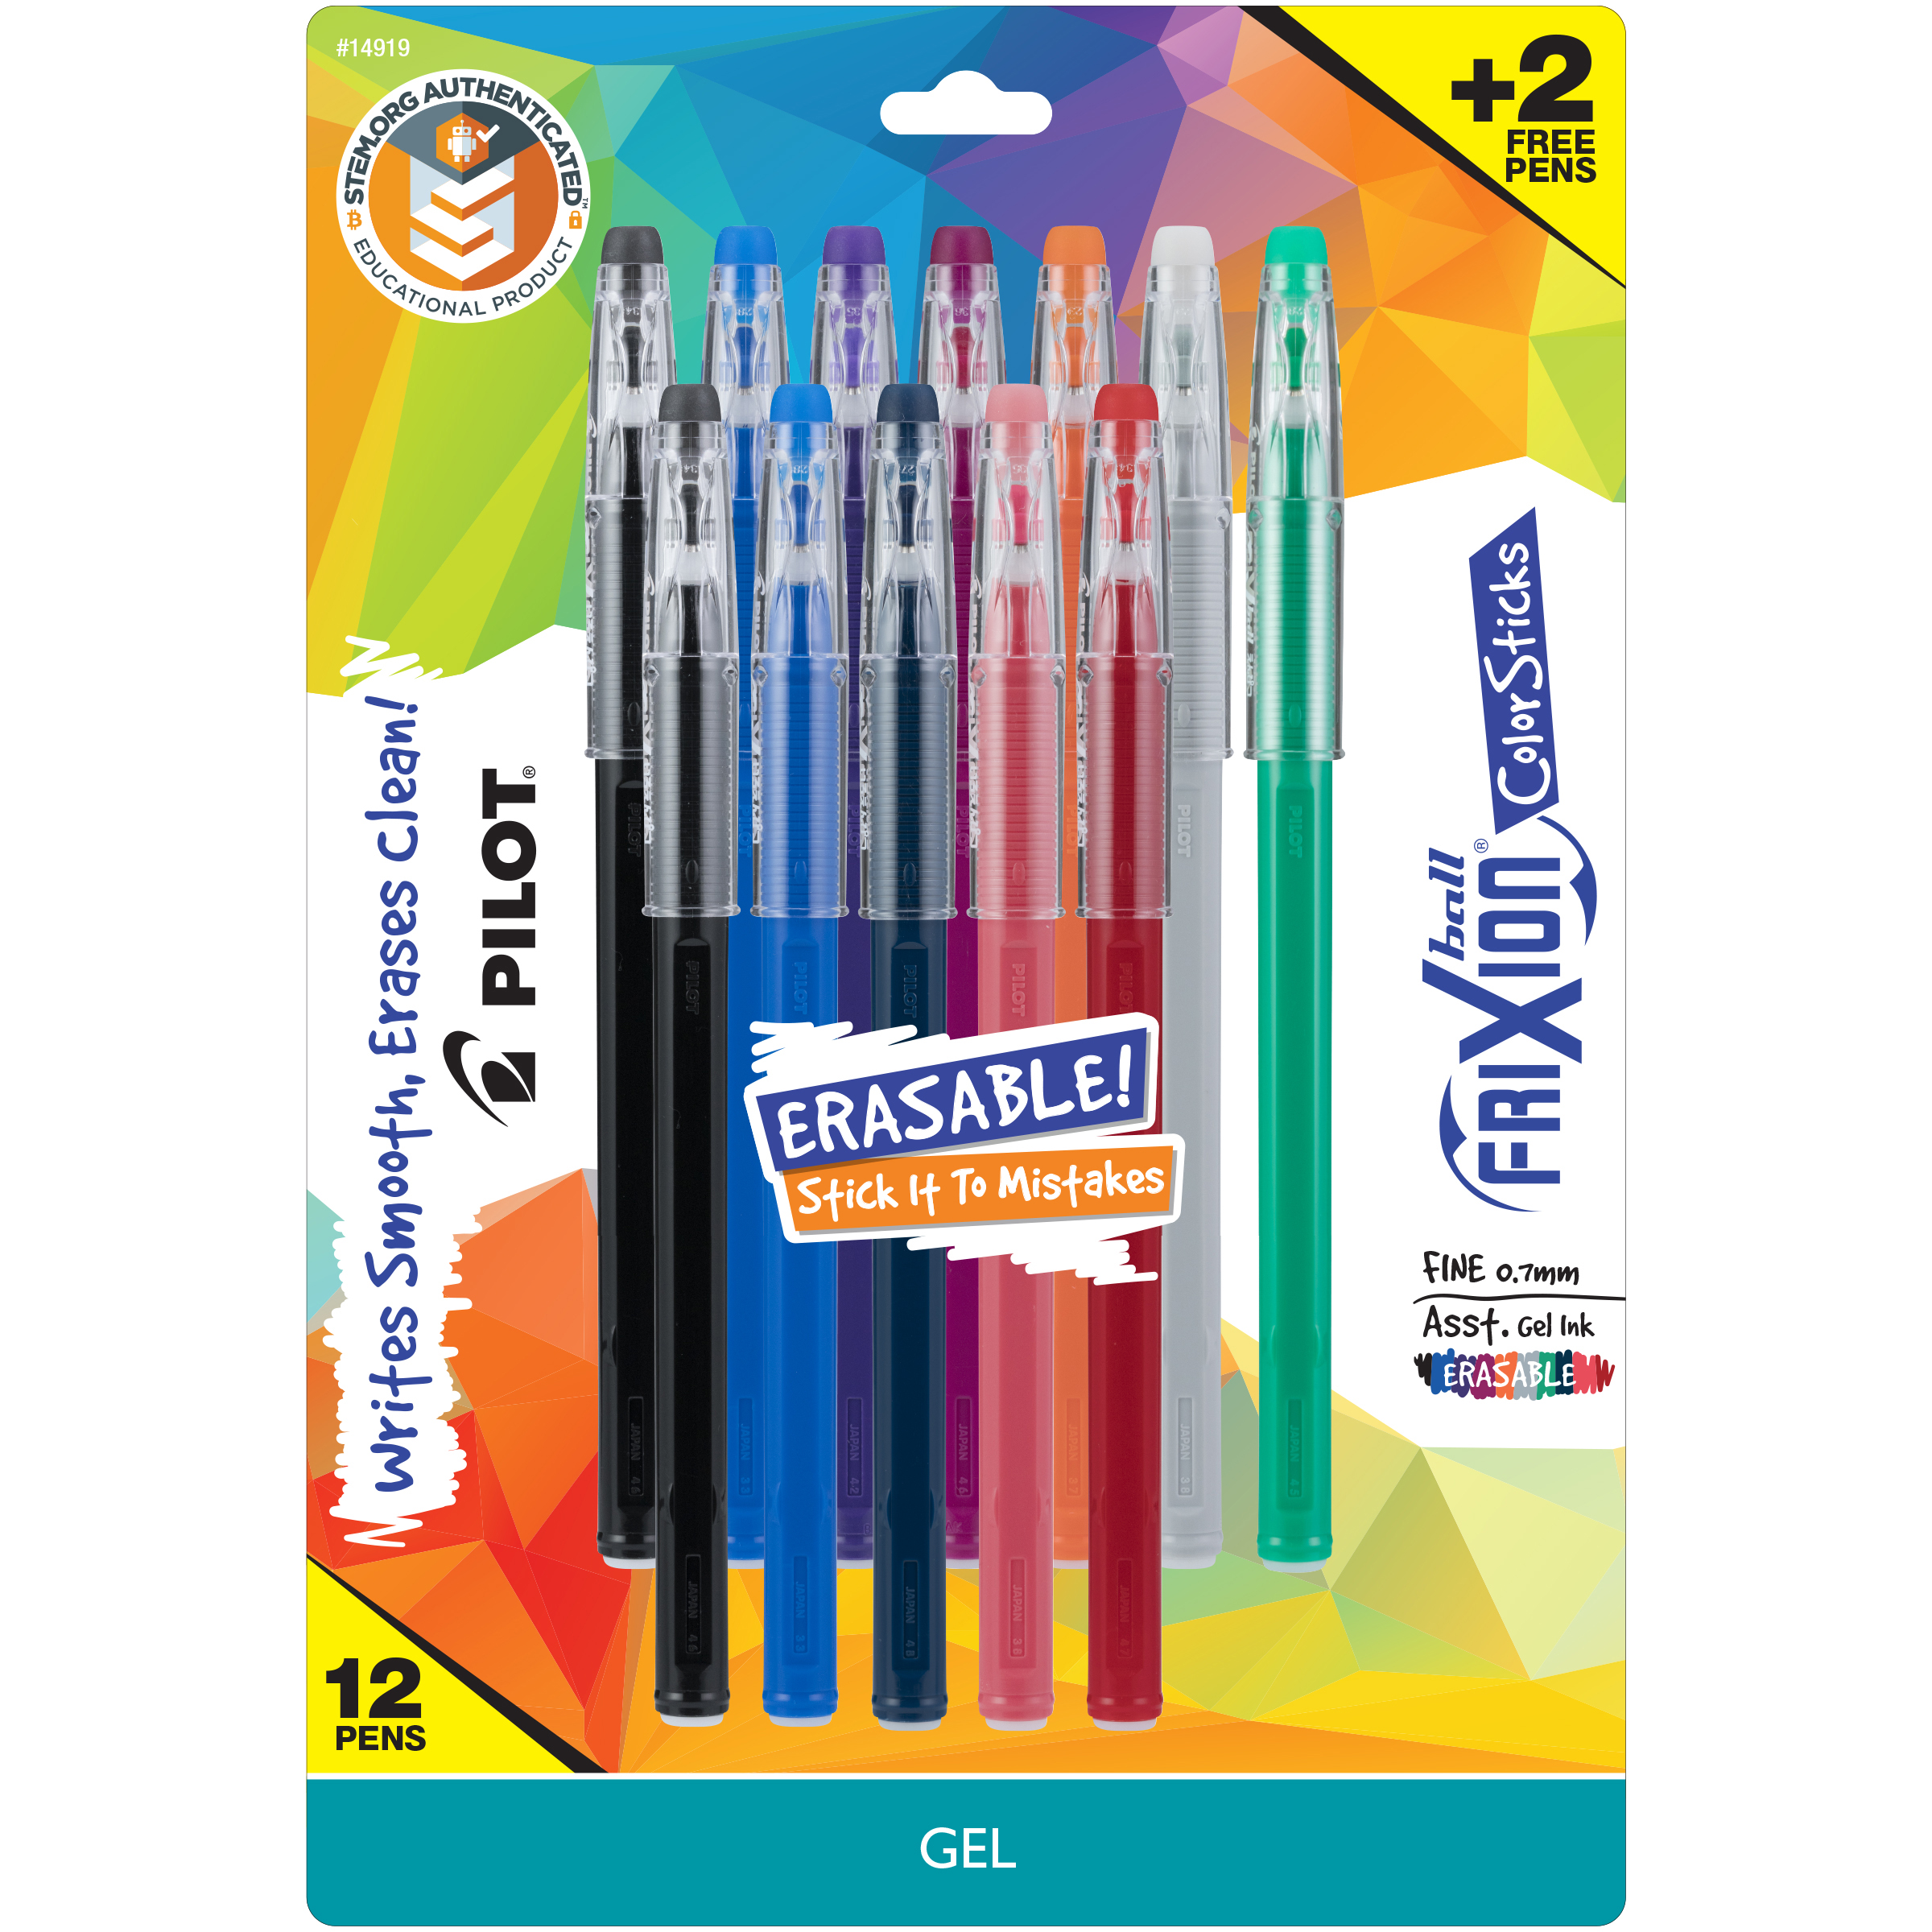 From August 3 through November 8, 2022, Pilot will donate 25 percent of the profits (up to $50,000) from every purchase of the FriXion ColorSticks 10-packs sold at Walmart, Target and other retailers, and of the FriXion ColorSticks 16-pack sold on Amazon, to Girls Who Code.